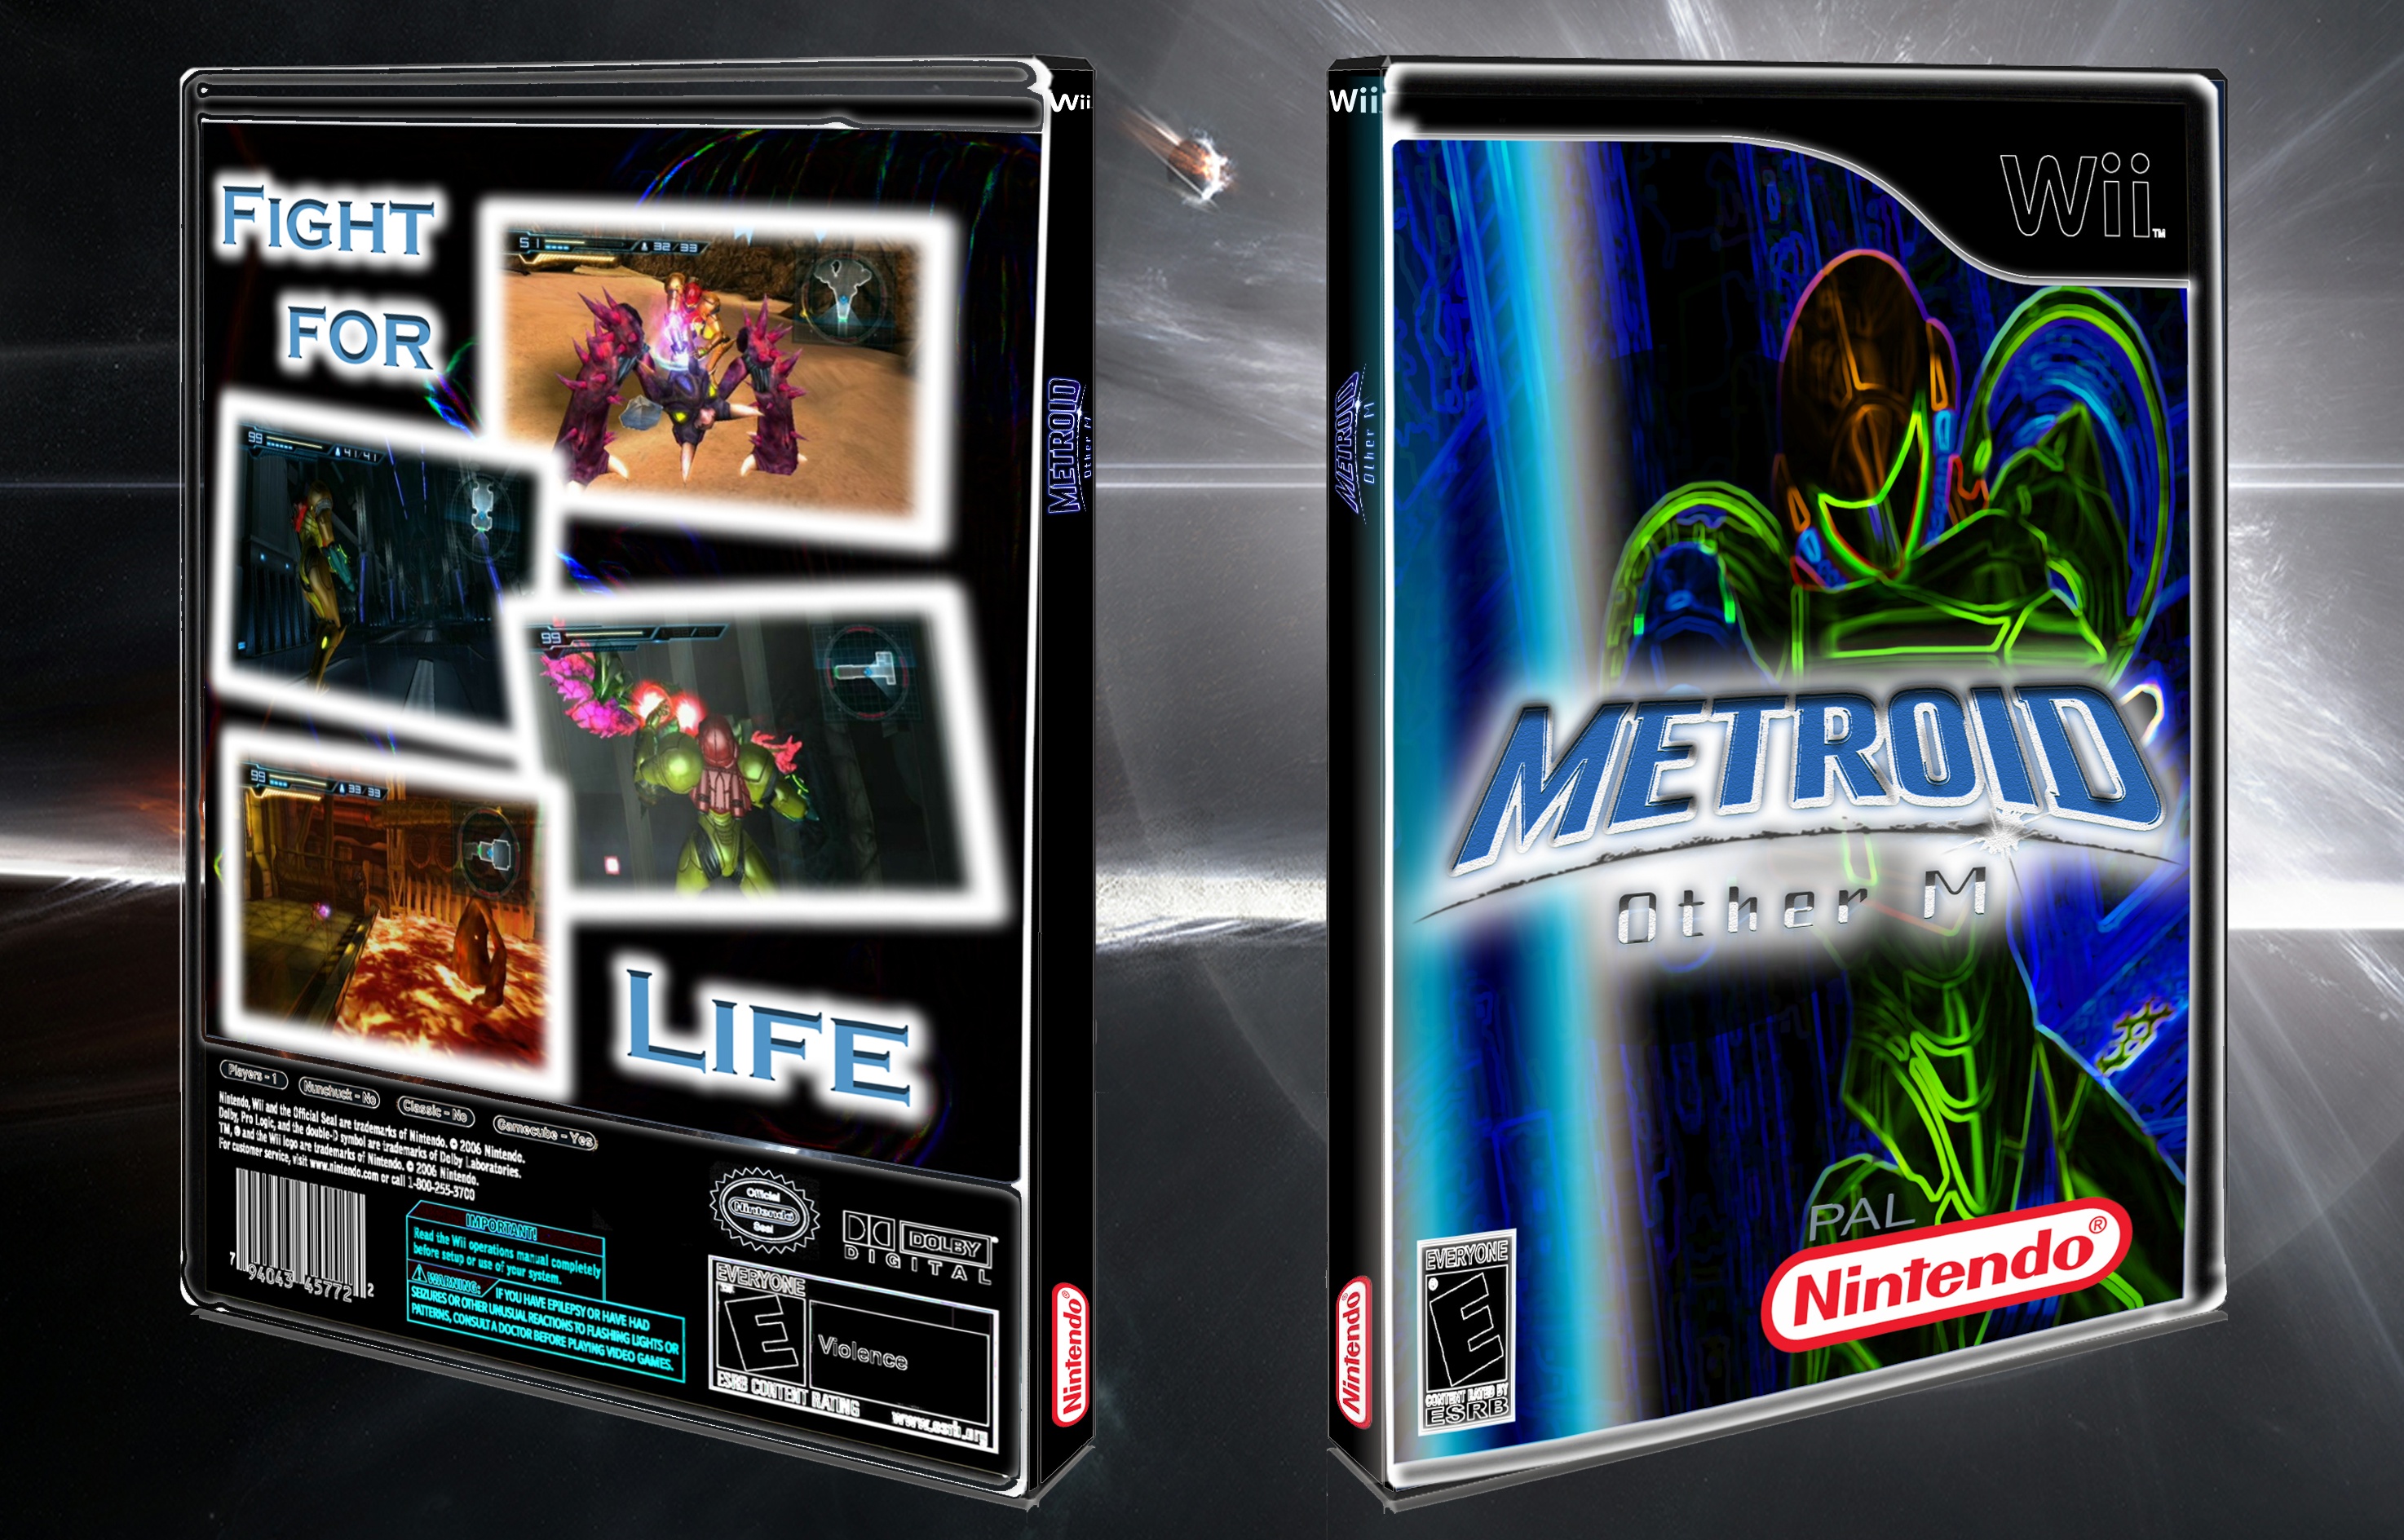 Metroid Other M box cover